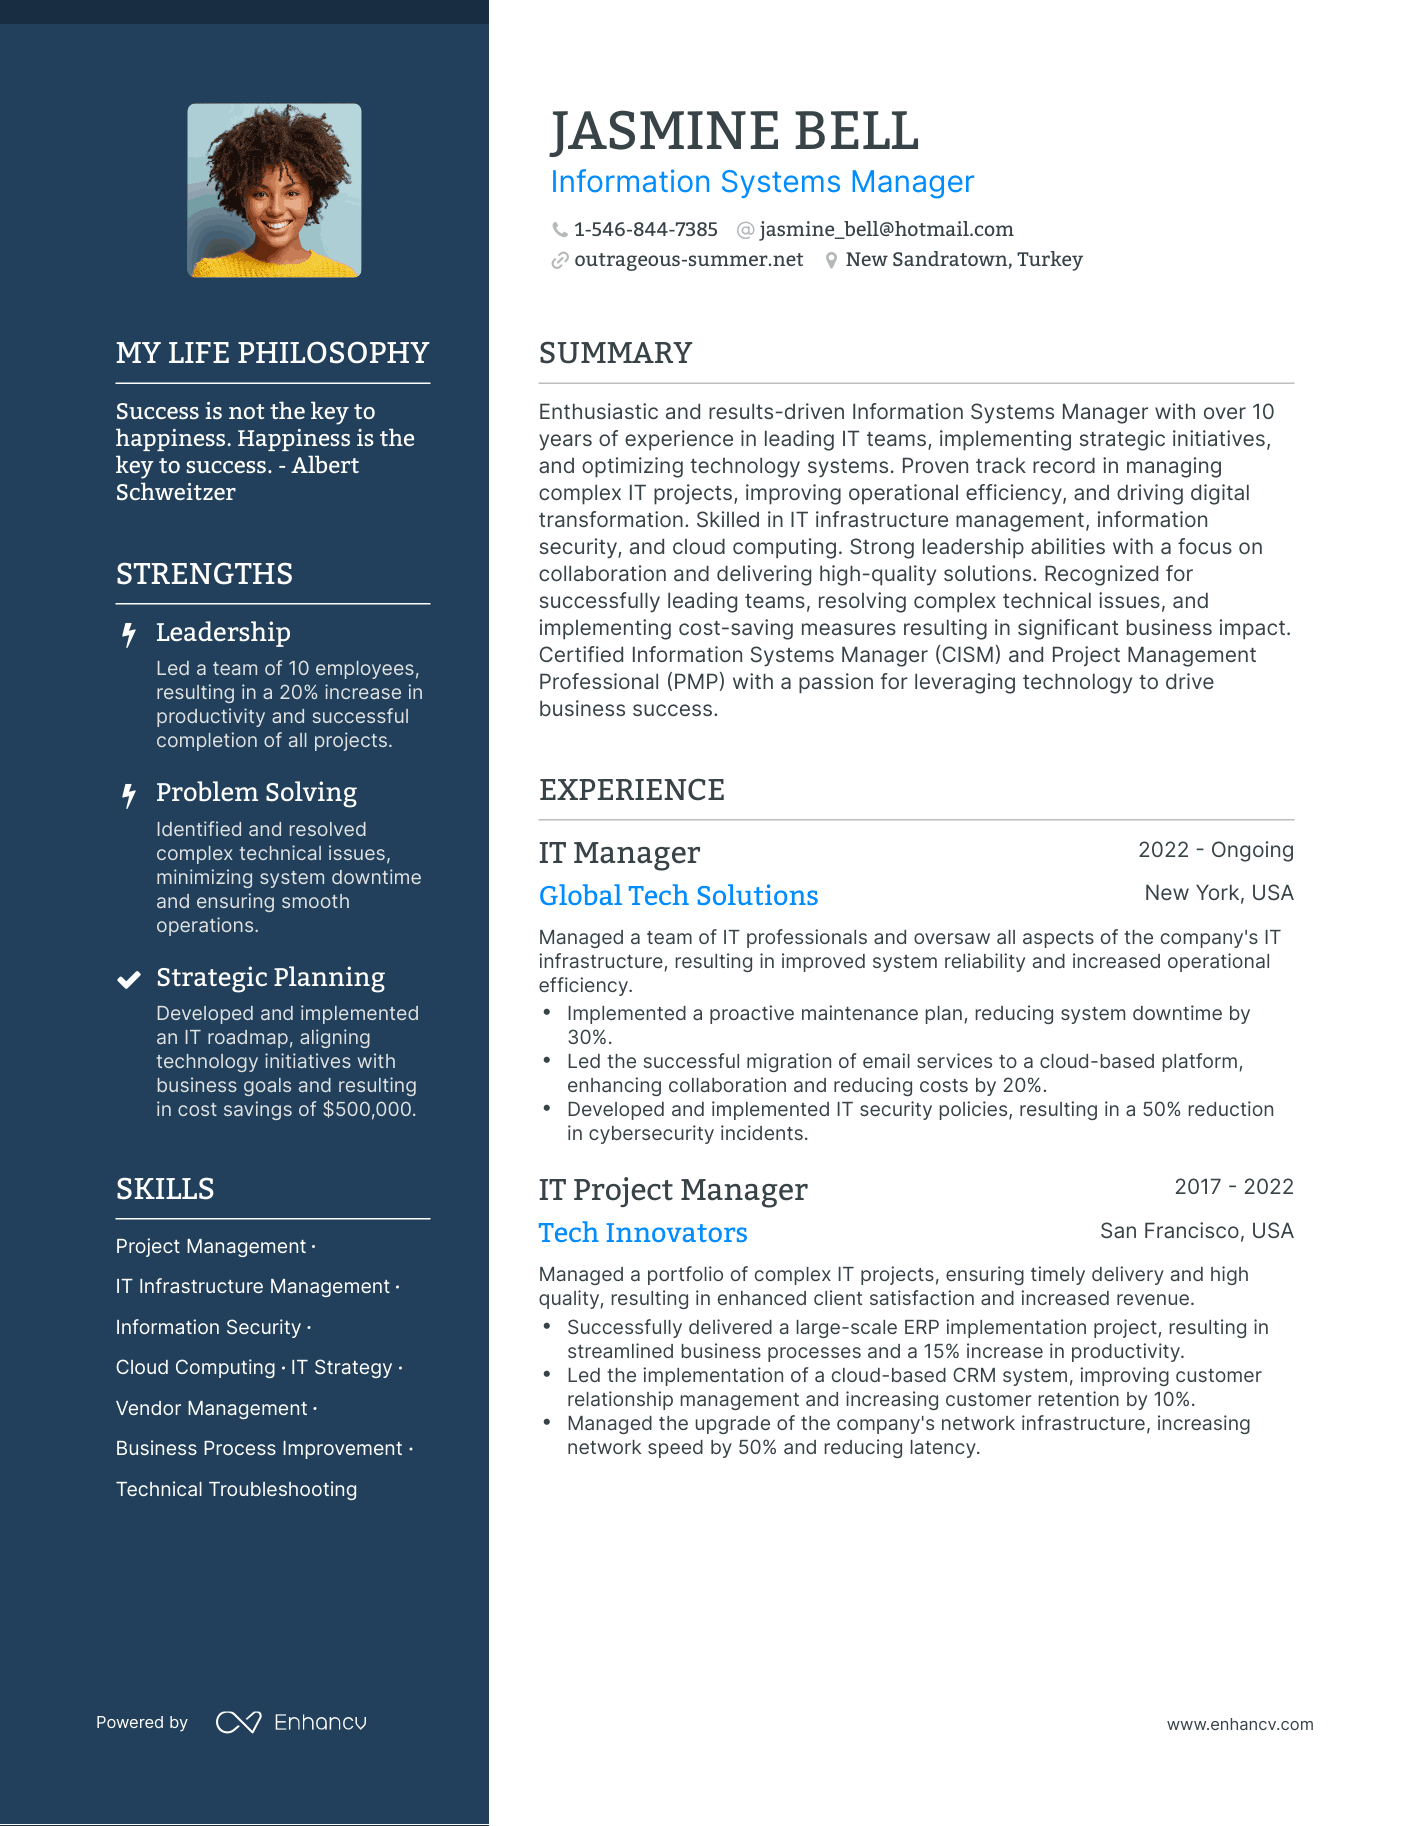 Information Systems Manager resume example